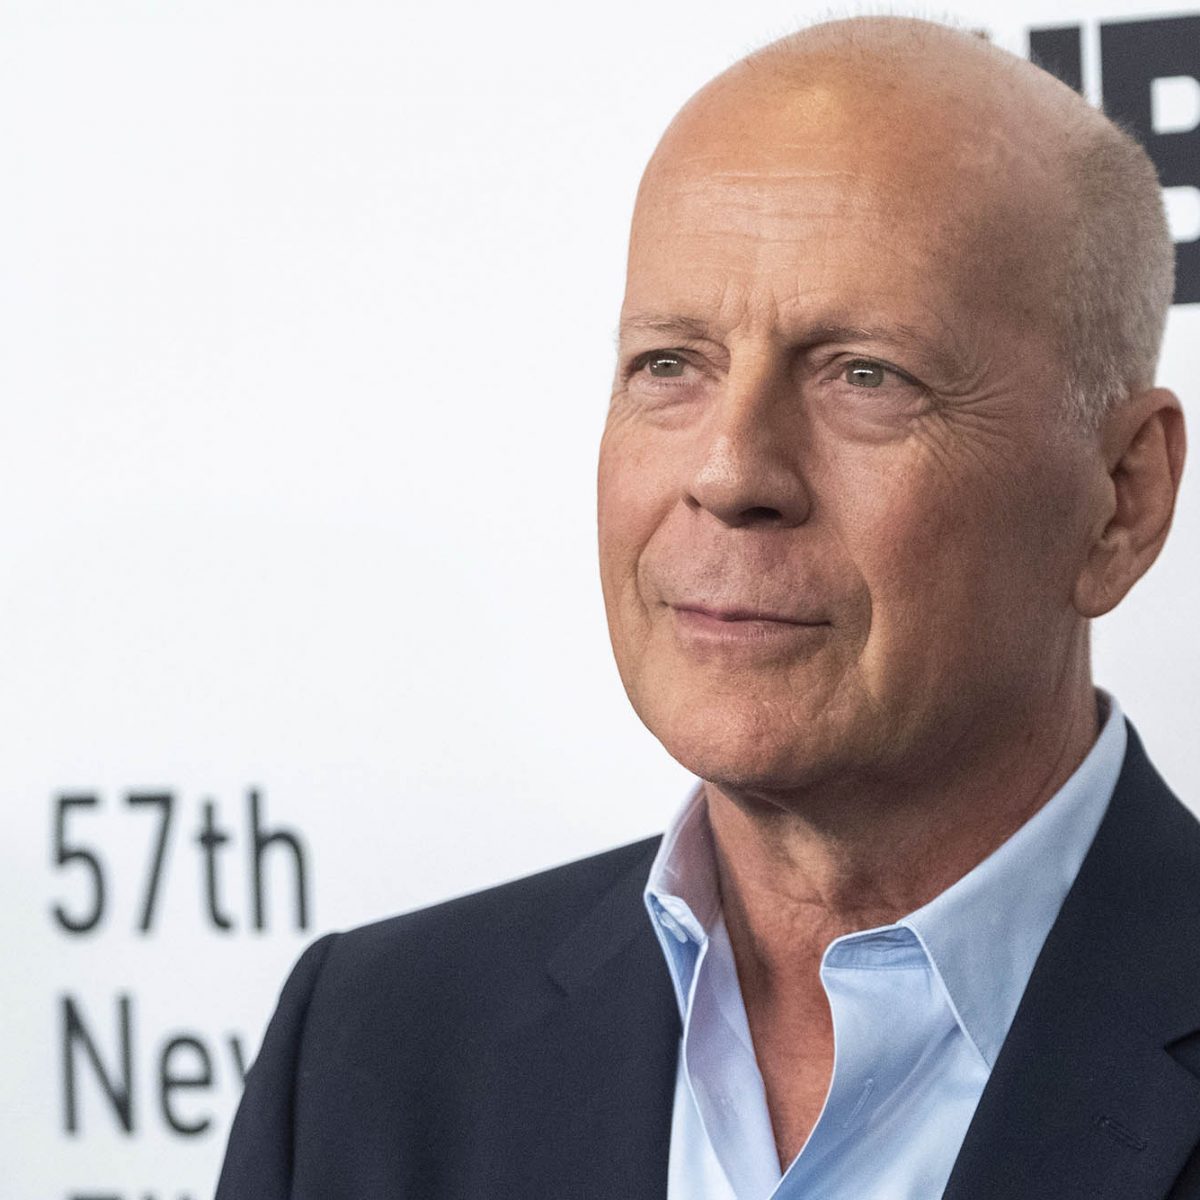 What Now for Bruce Willis after Actors Recent Dementia Diagnosis? The Brink Boston University image